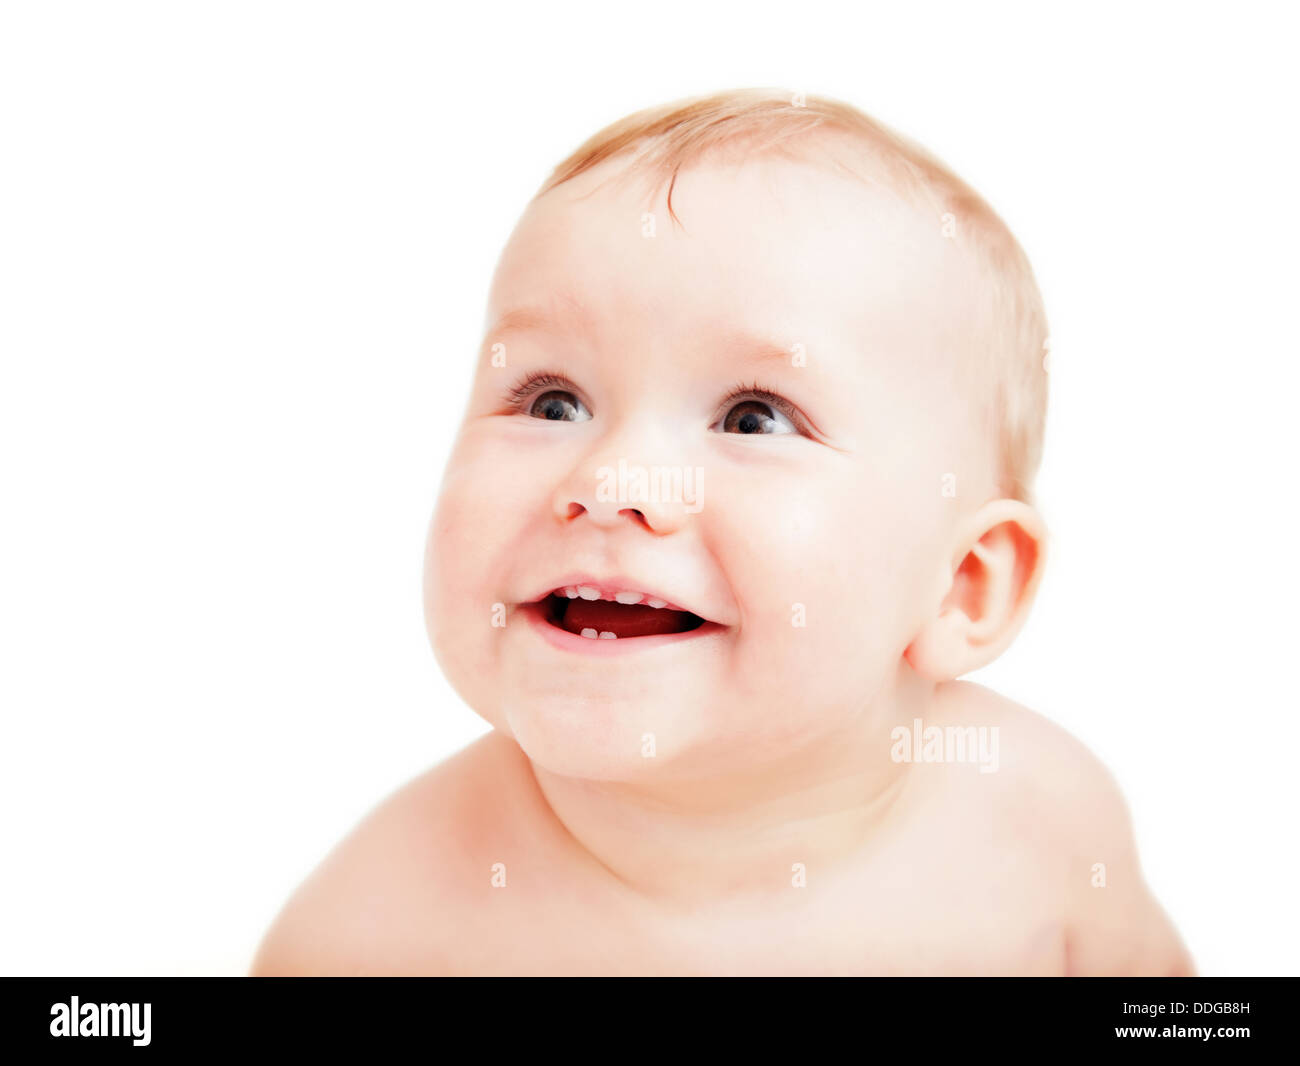 Cute happy baby smiling. Stock Photo